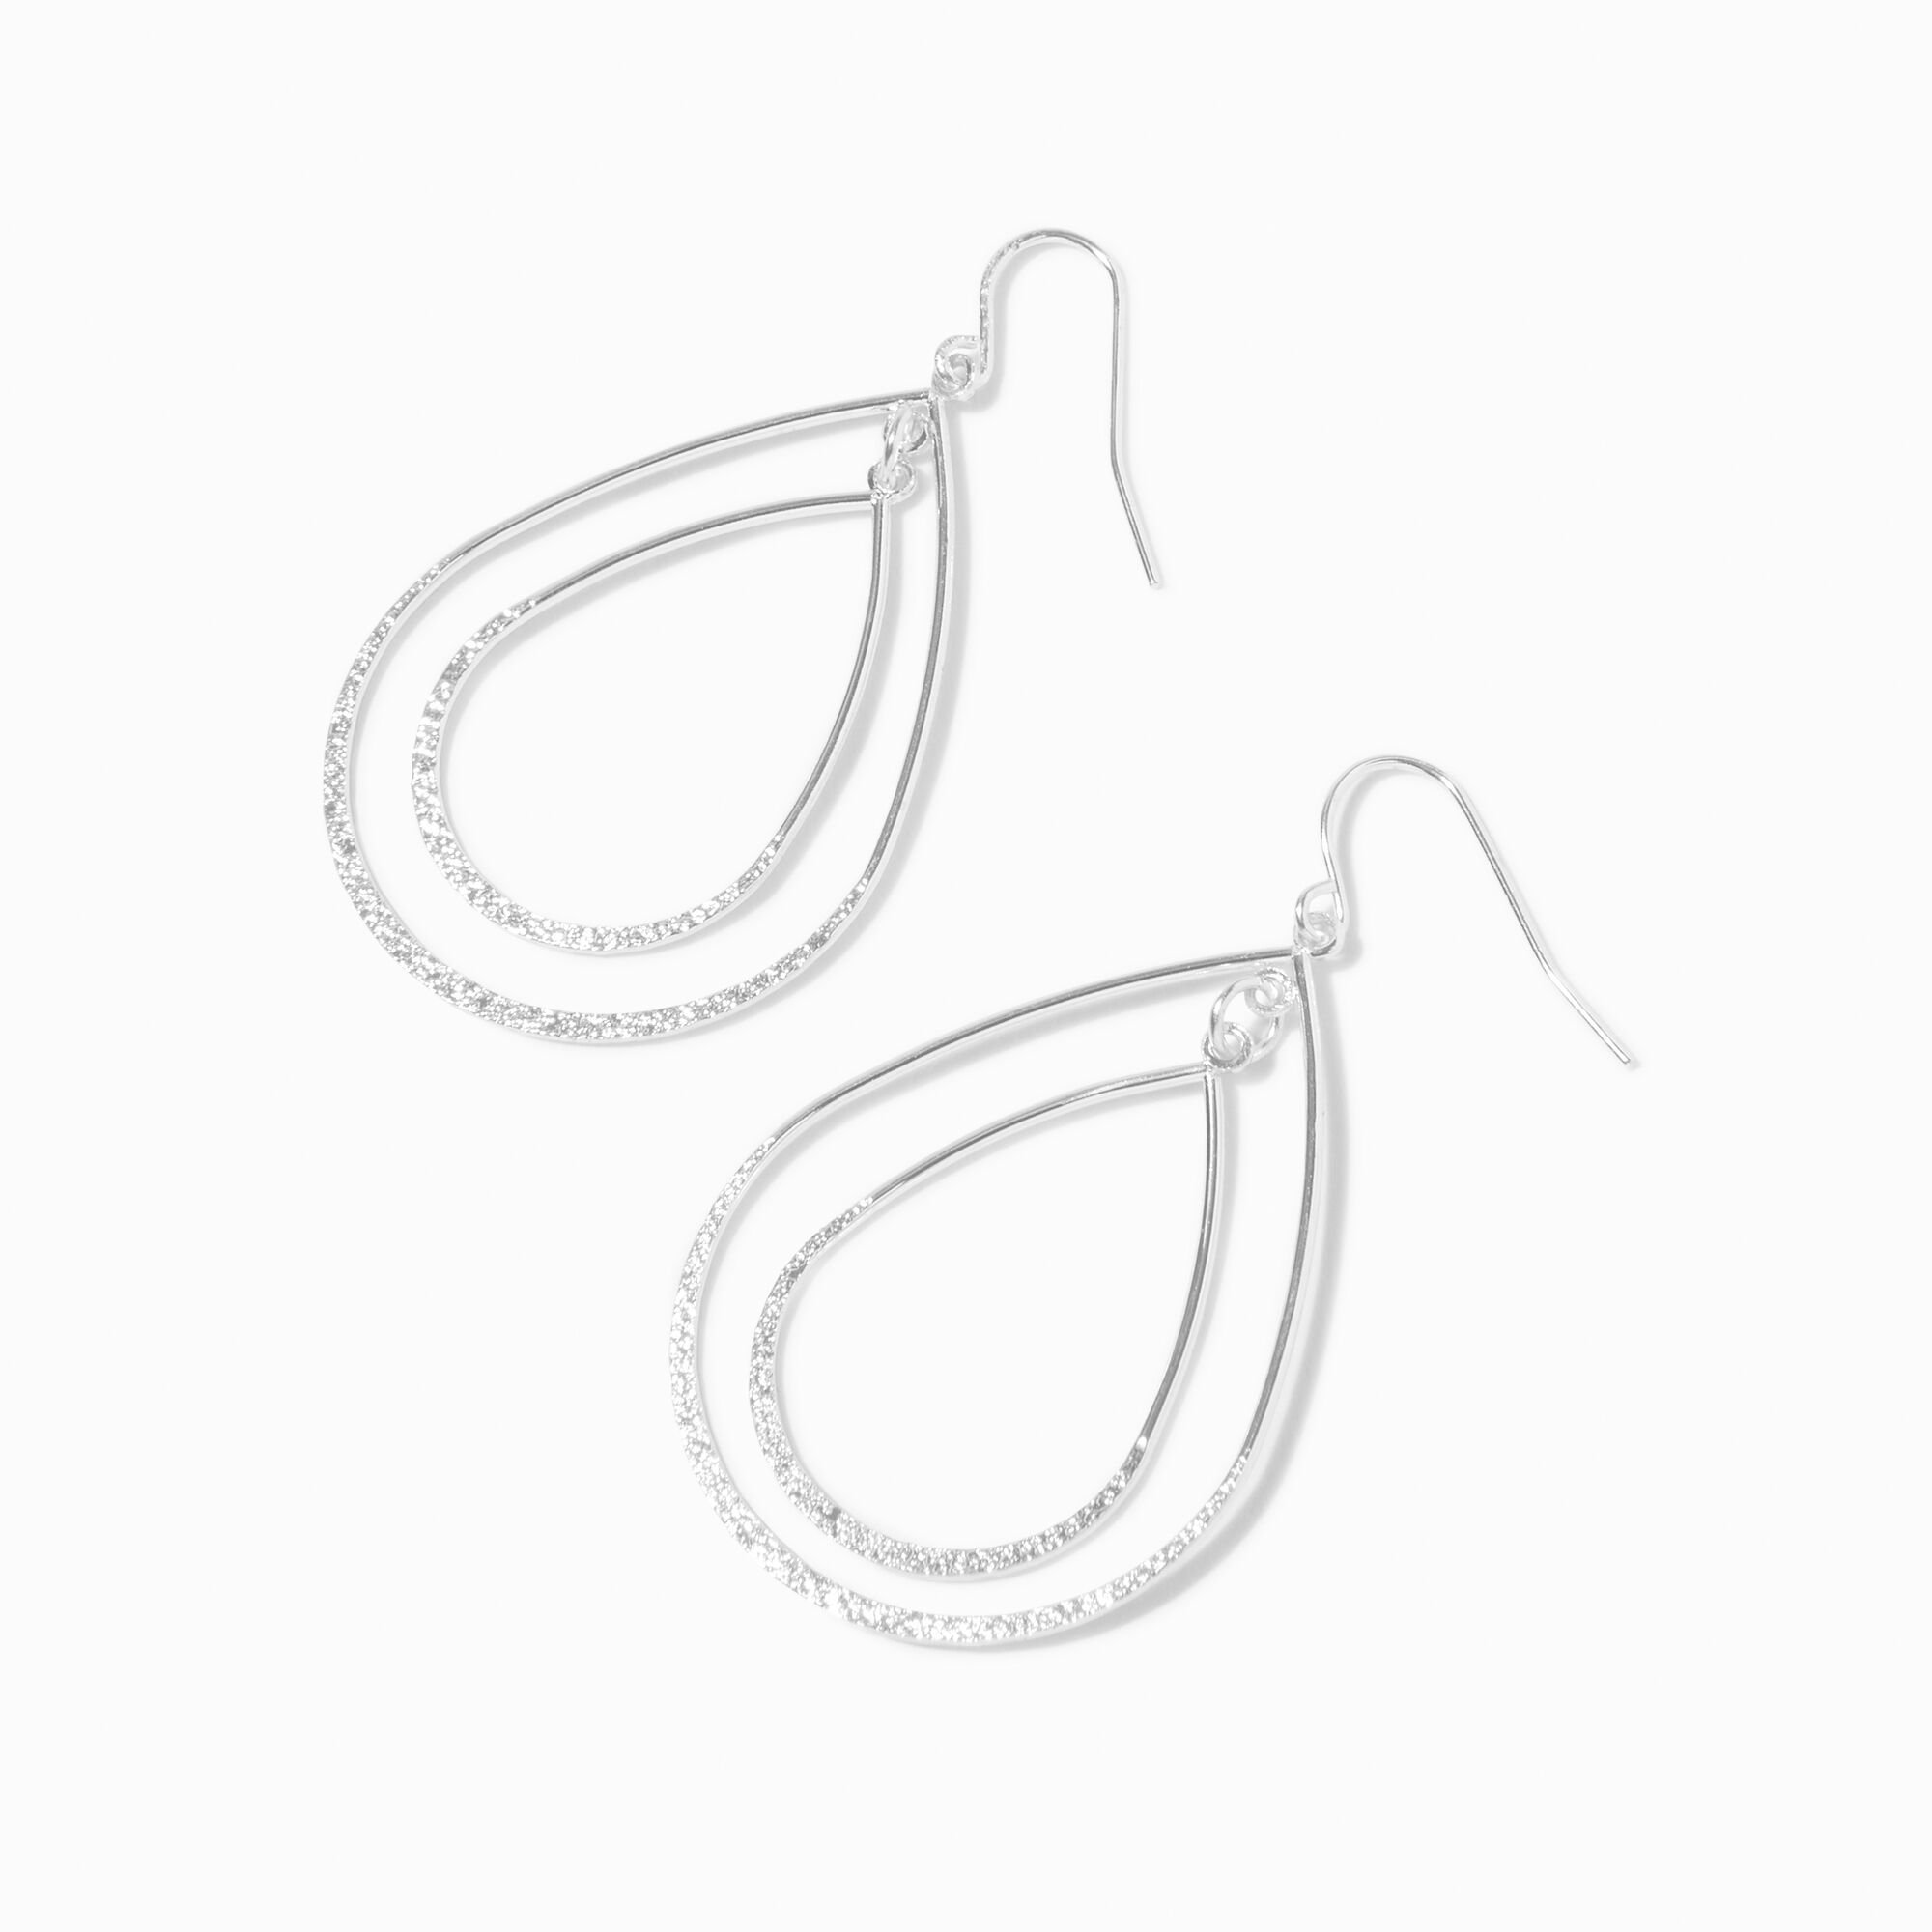 View Claires Tone 15 Double Teardrop Drop Earrings Silver information